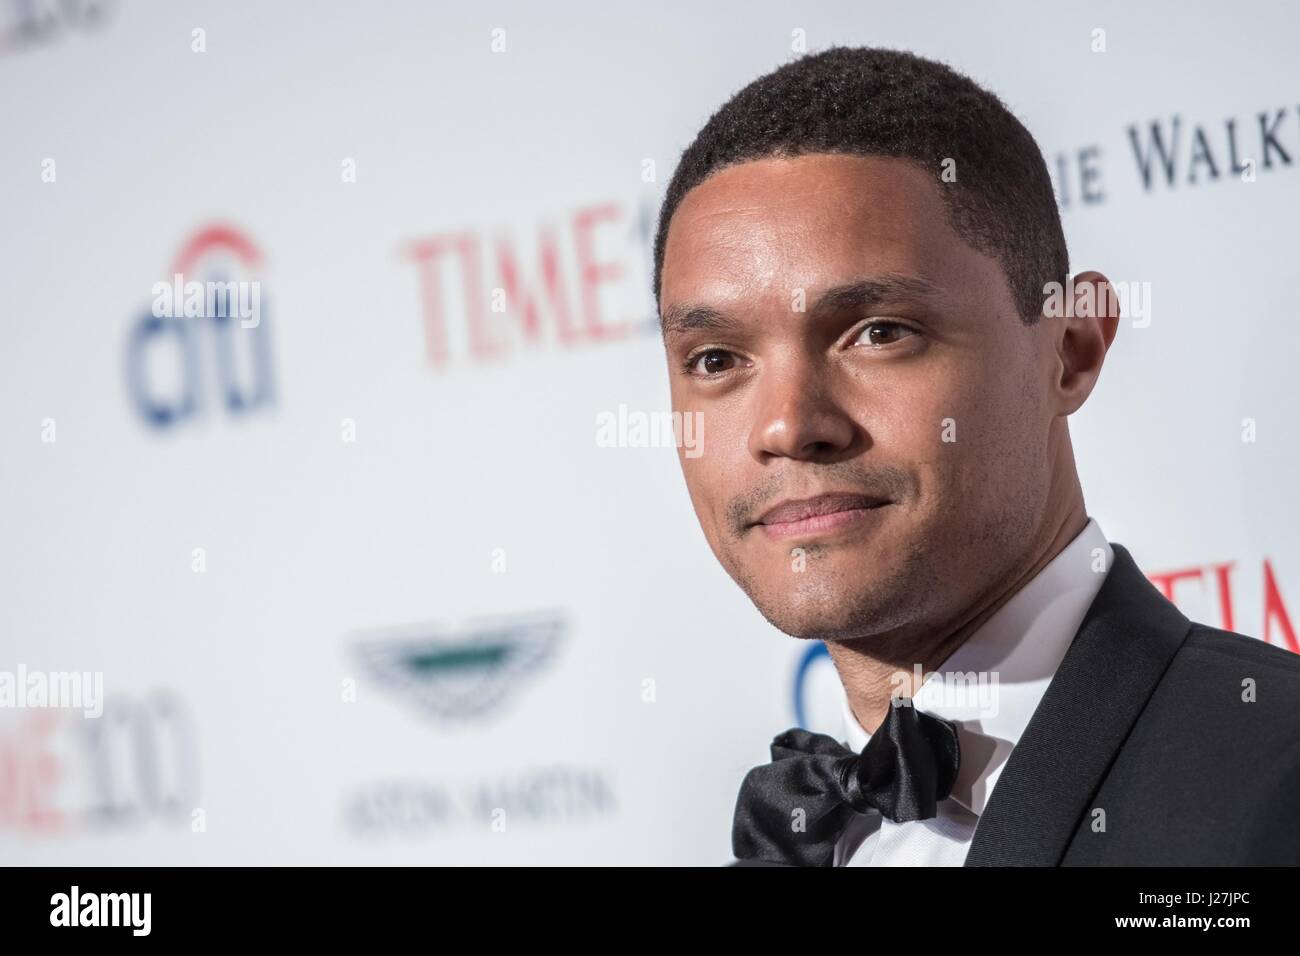 New York, NY, USA. 25th Apr, 2017. Trevor Noah at arrivals for TIME 100 Gala Dinner 2017, Jazz at Lincoln Center's Frederick P. Rose Hall, New York, NY April 25, 2017. Credit: Steven Ferdman/Everett Collection/Alamy Live News Stock Photo